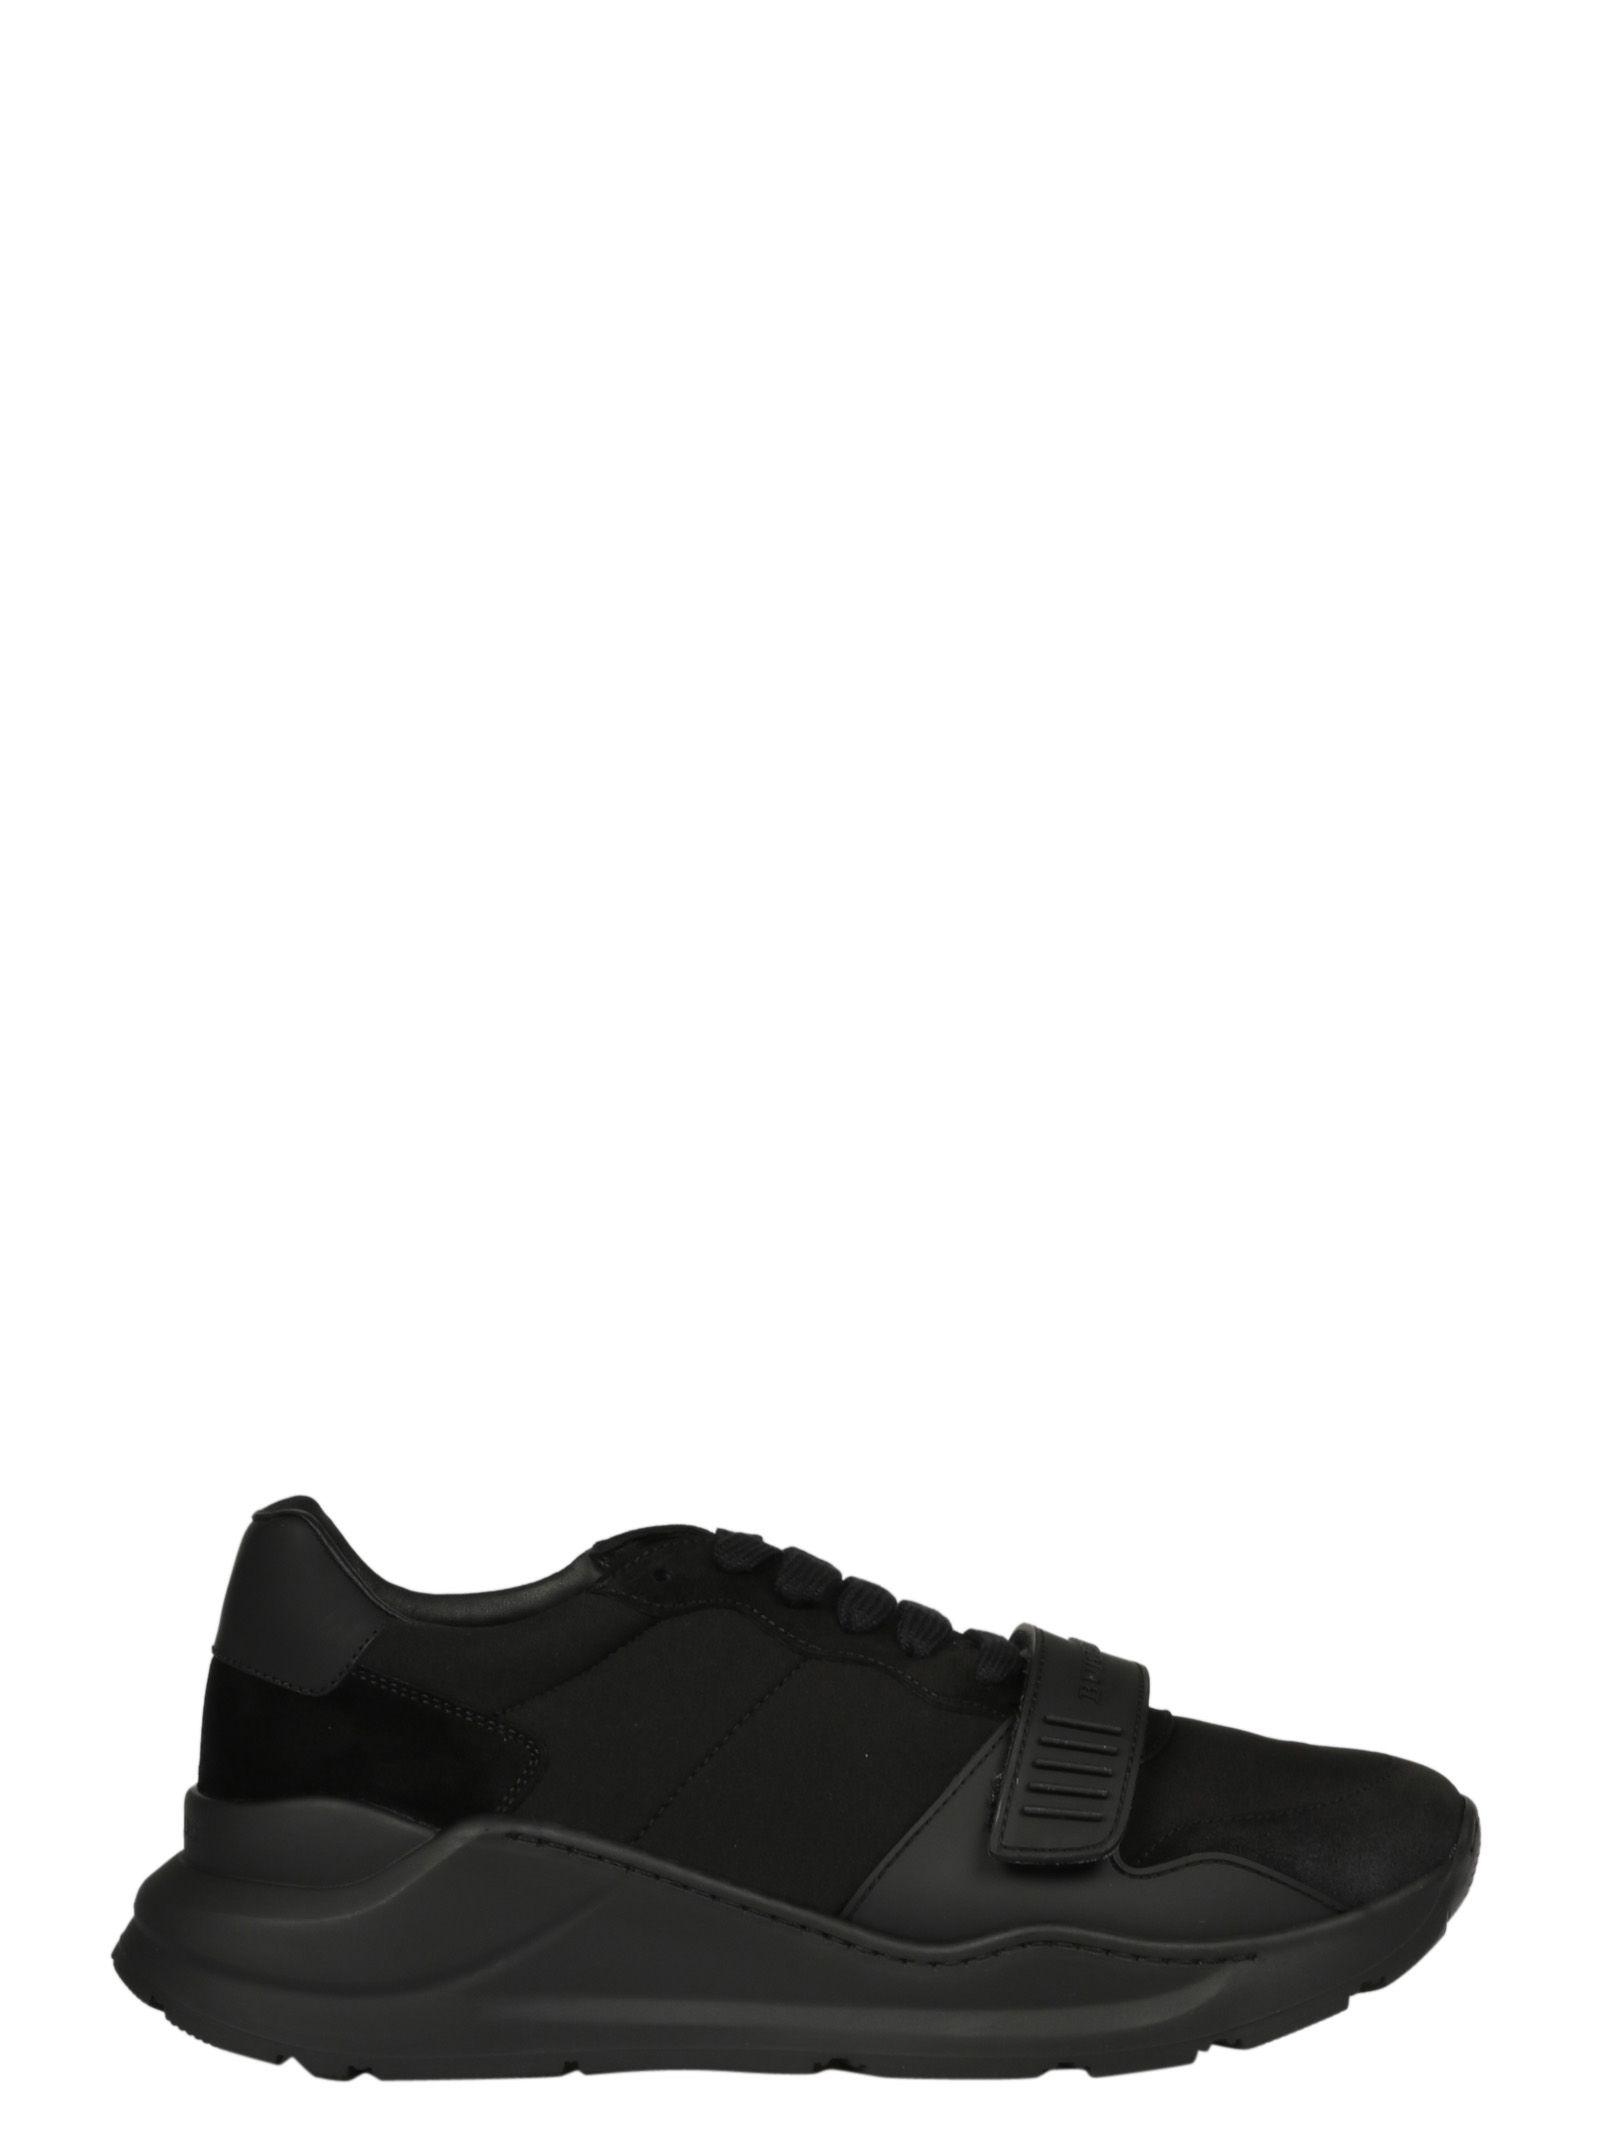 limit Learning End Burberry Runway Extensions Regis Sneakers In Black | ModeSens